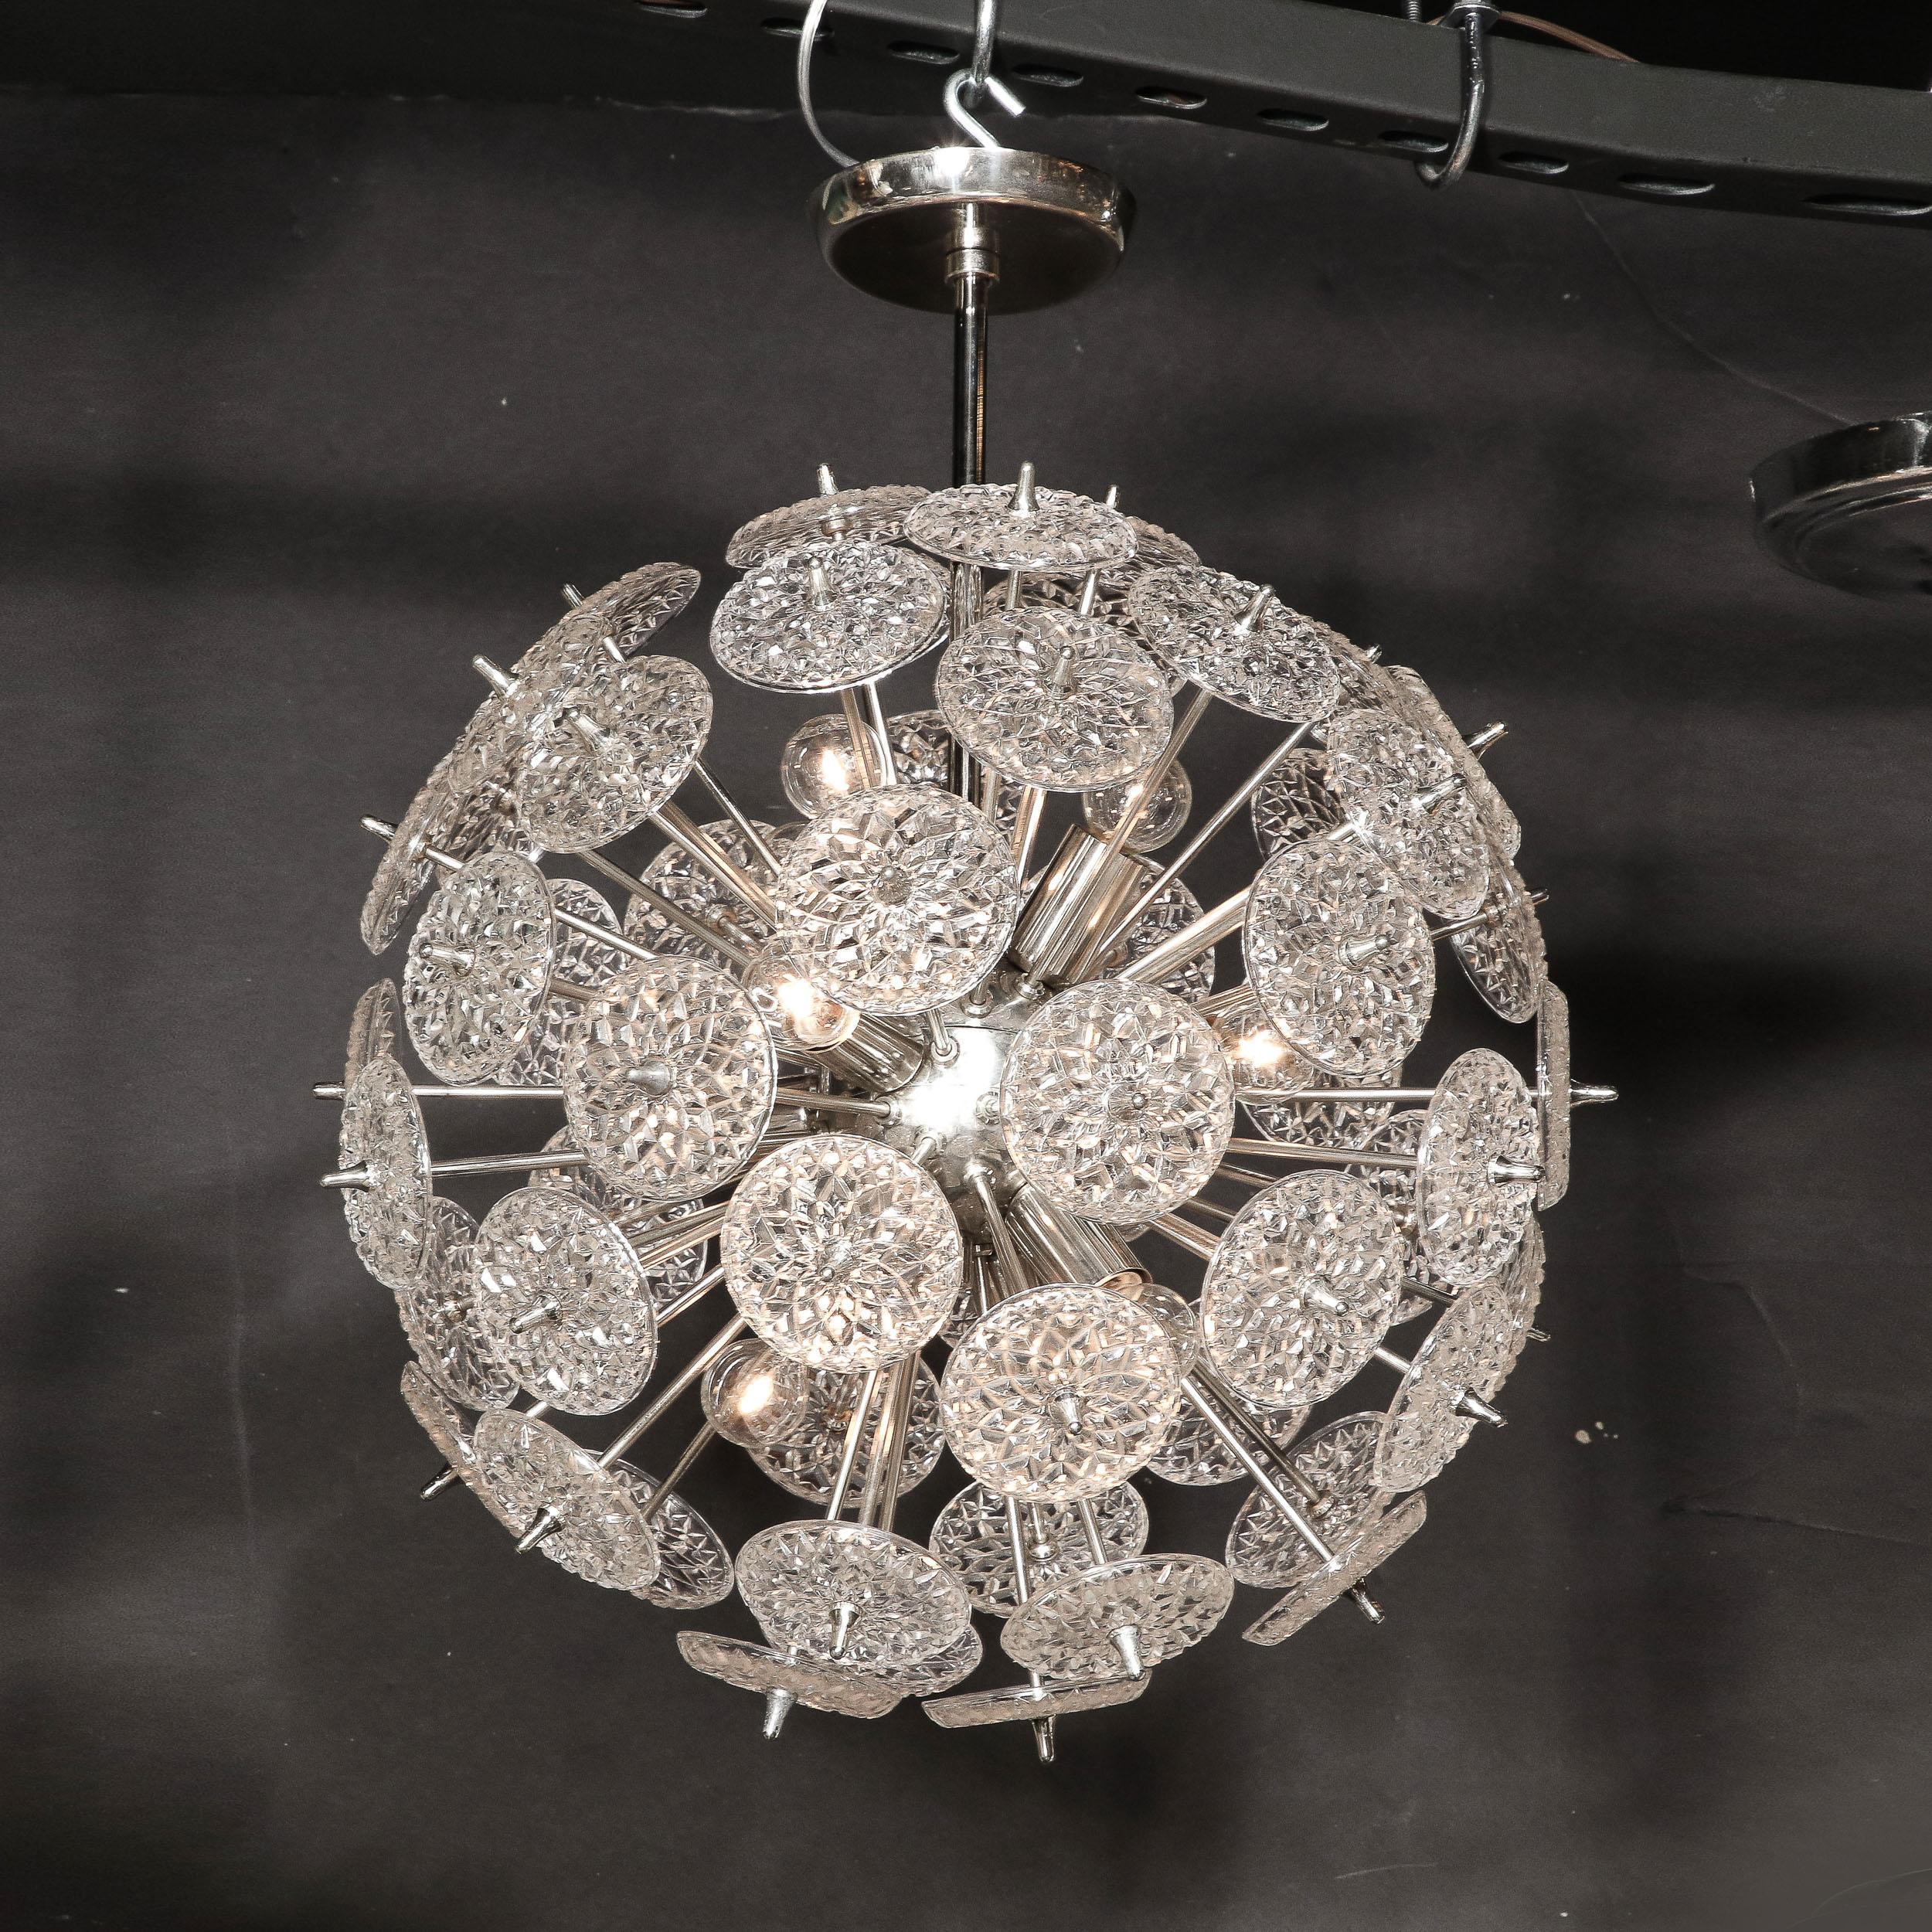 Mid-Century Modernist Pressed Glass Disc Sputnik Chandelier w/ Nickel Fittings In Excellent Condition For Sale In New York, NY